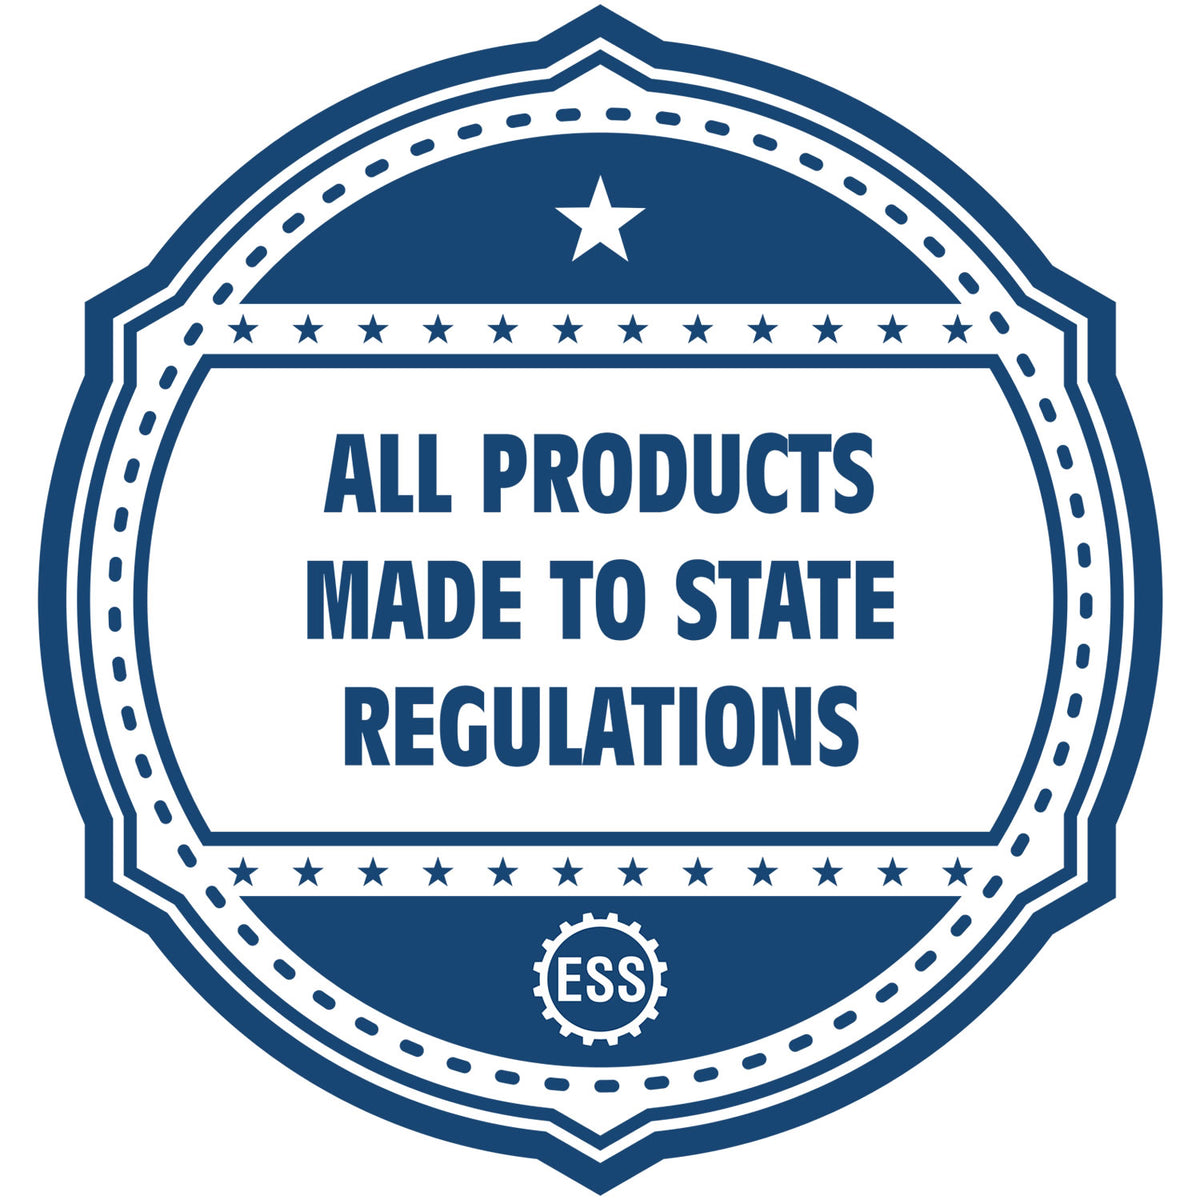 An icon or badge element for the Handheld Nebraska Professional Engineer Embosser showing that this product is made in compliance with state regulations.